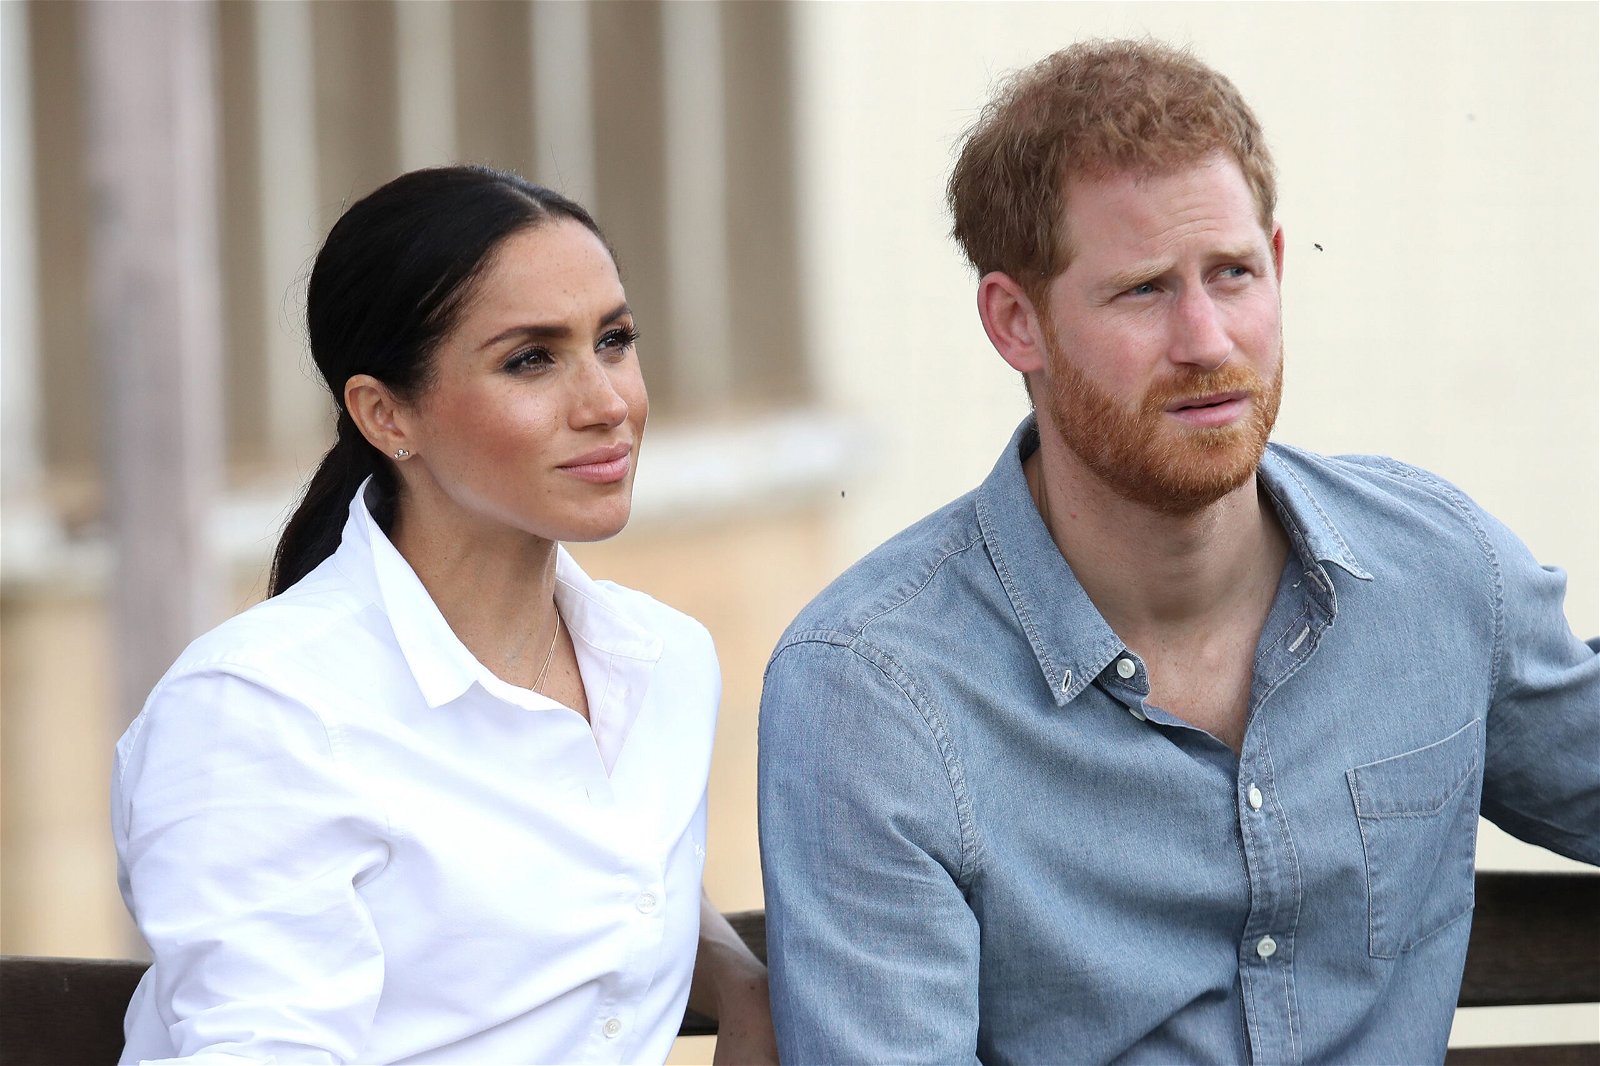 Prince Harry and Meghan Markle hire Adam Lilling